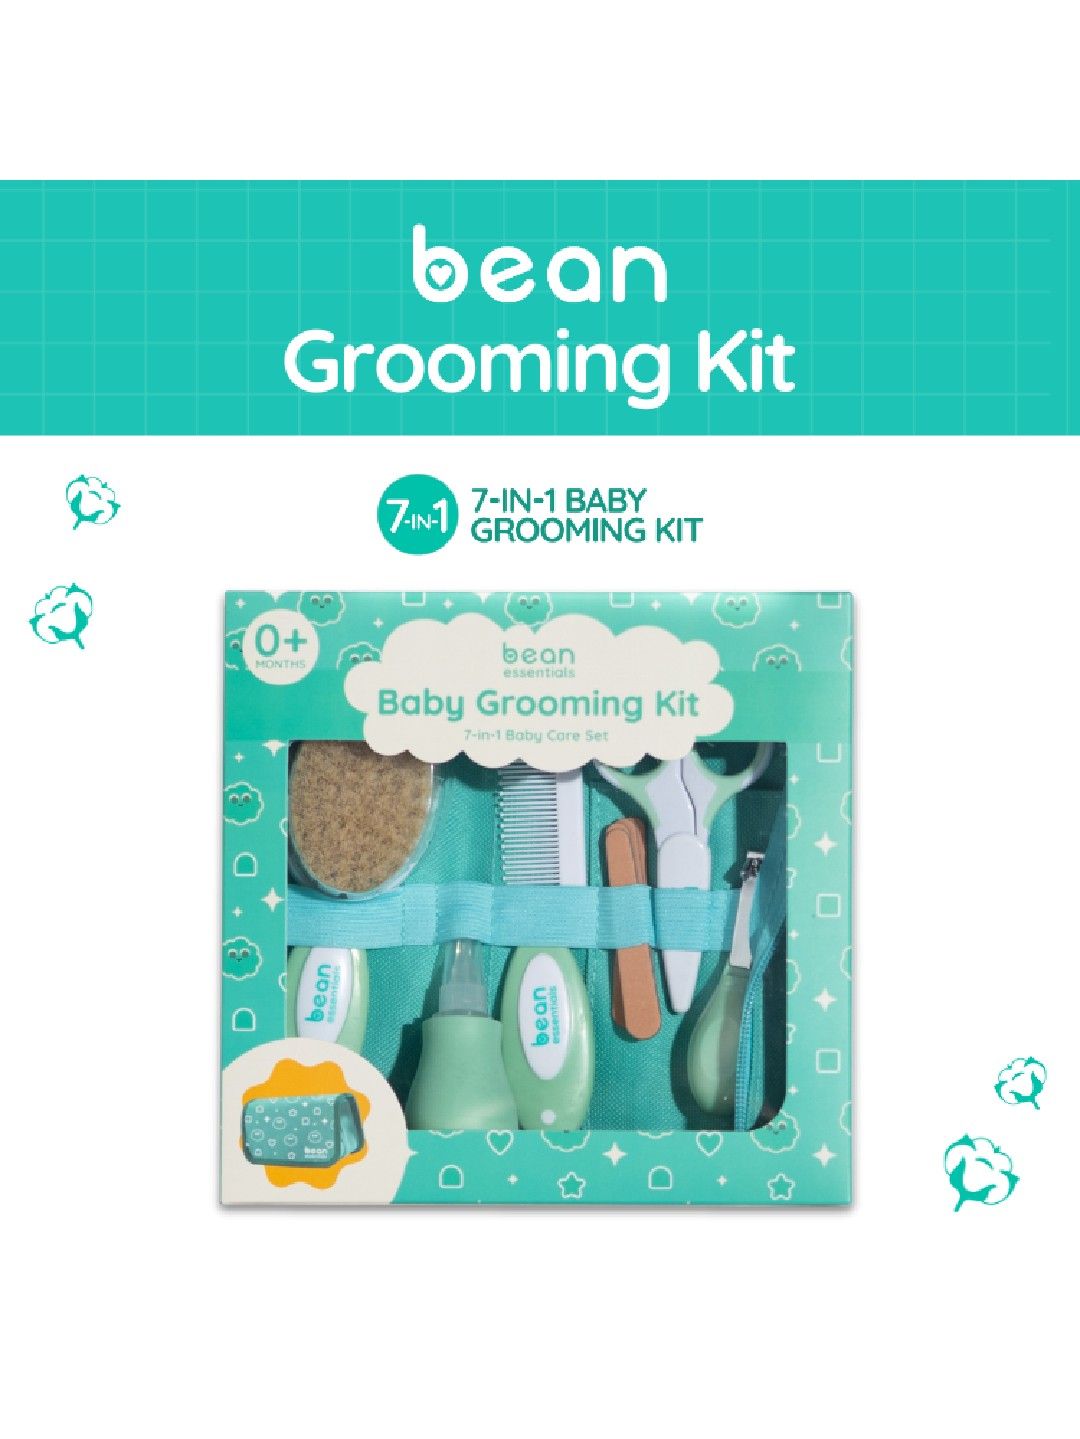 bean essentials Baby Grooming Kit (No Color- Image 1)